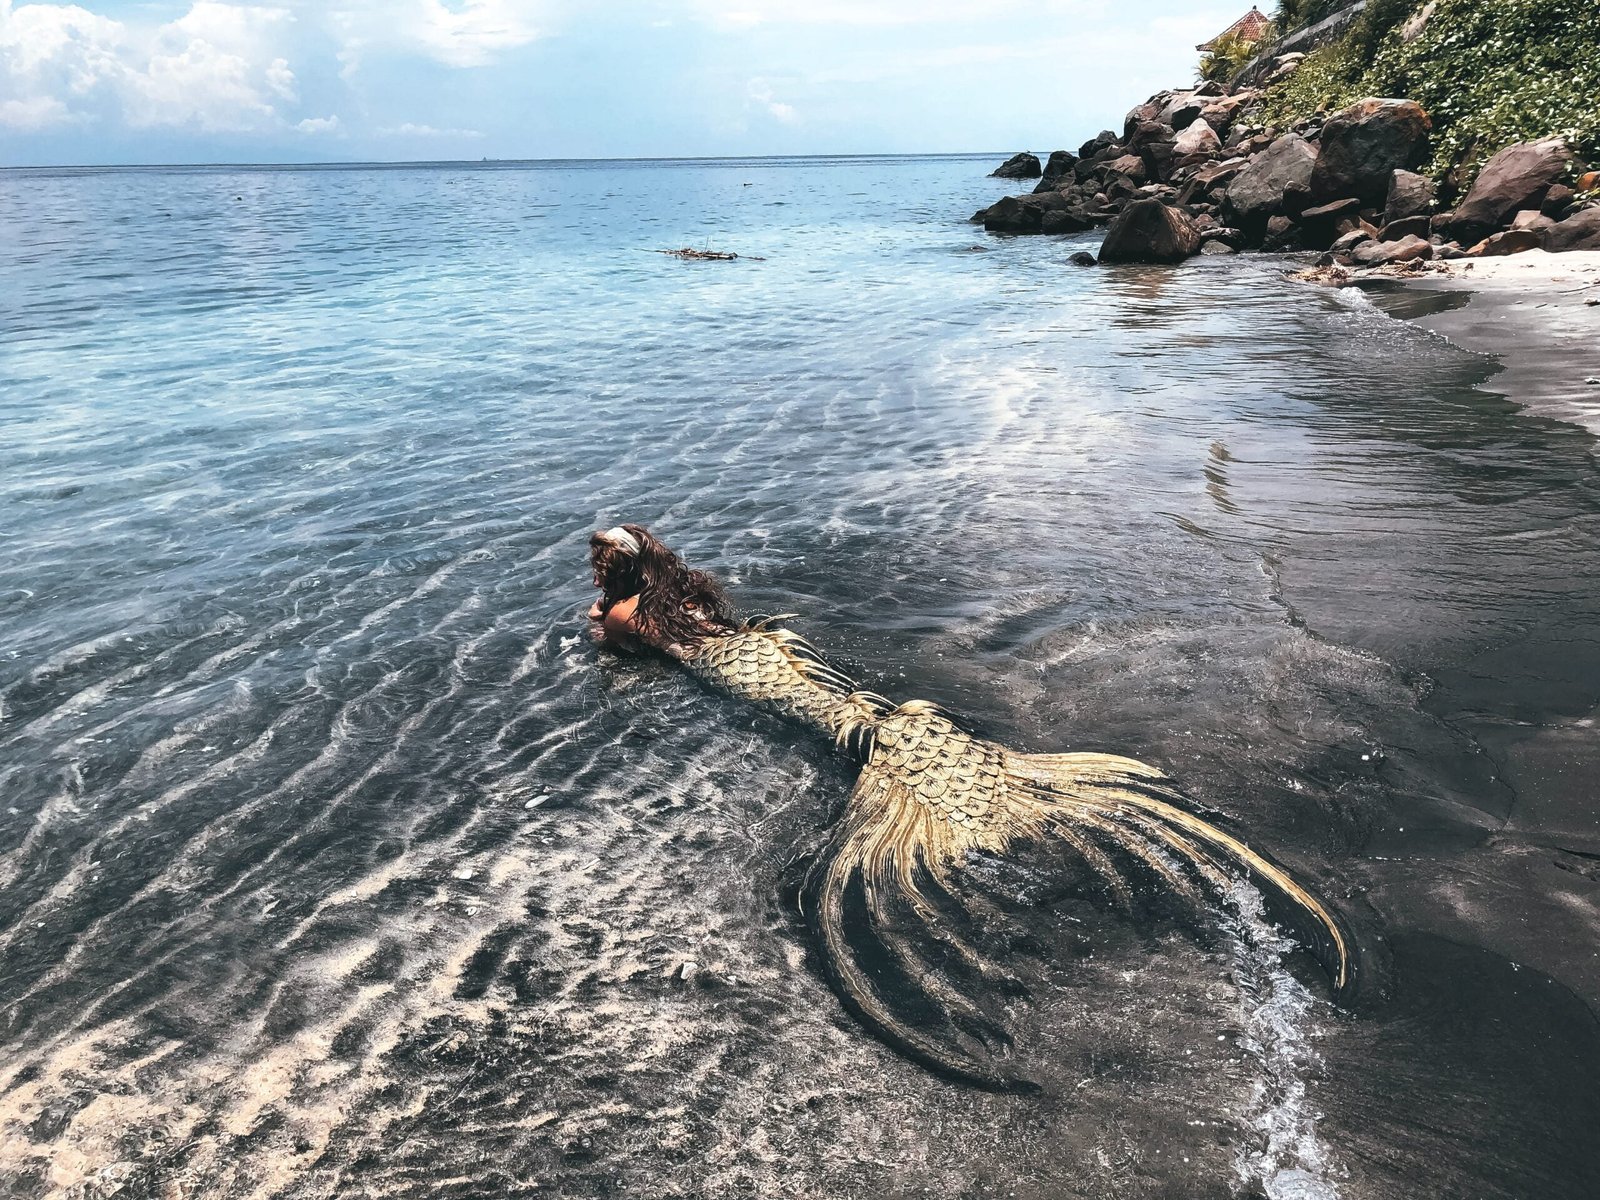 Where Have All the Mermaids Gone from the Ocean?